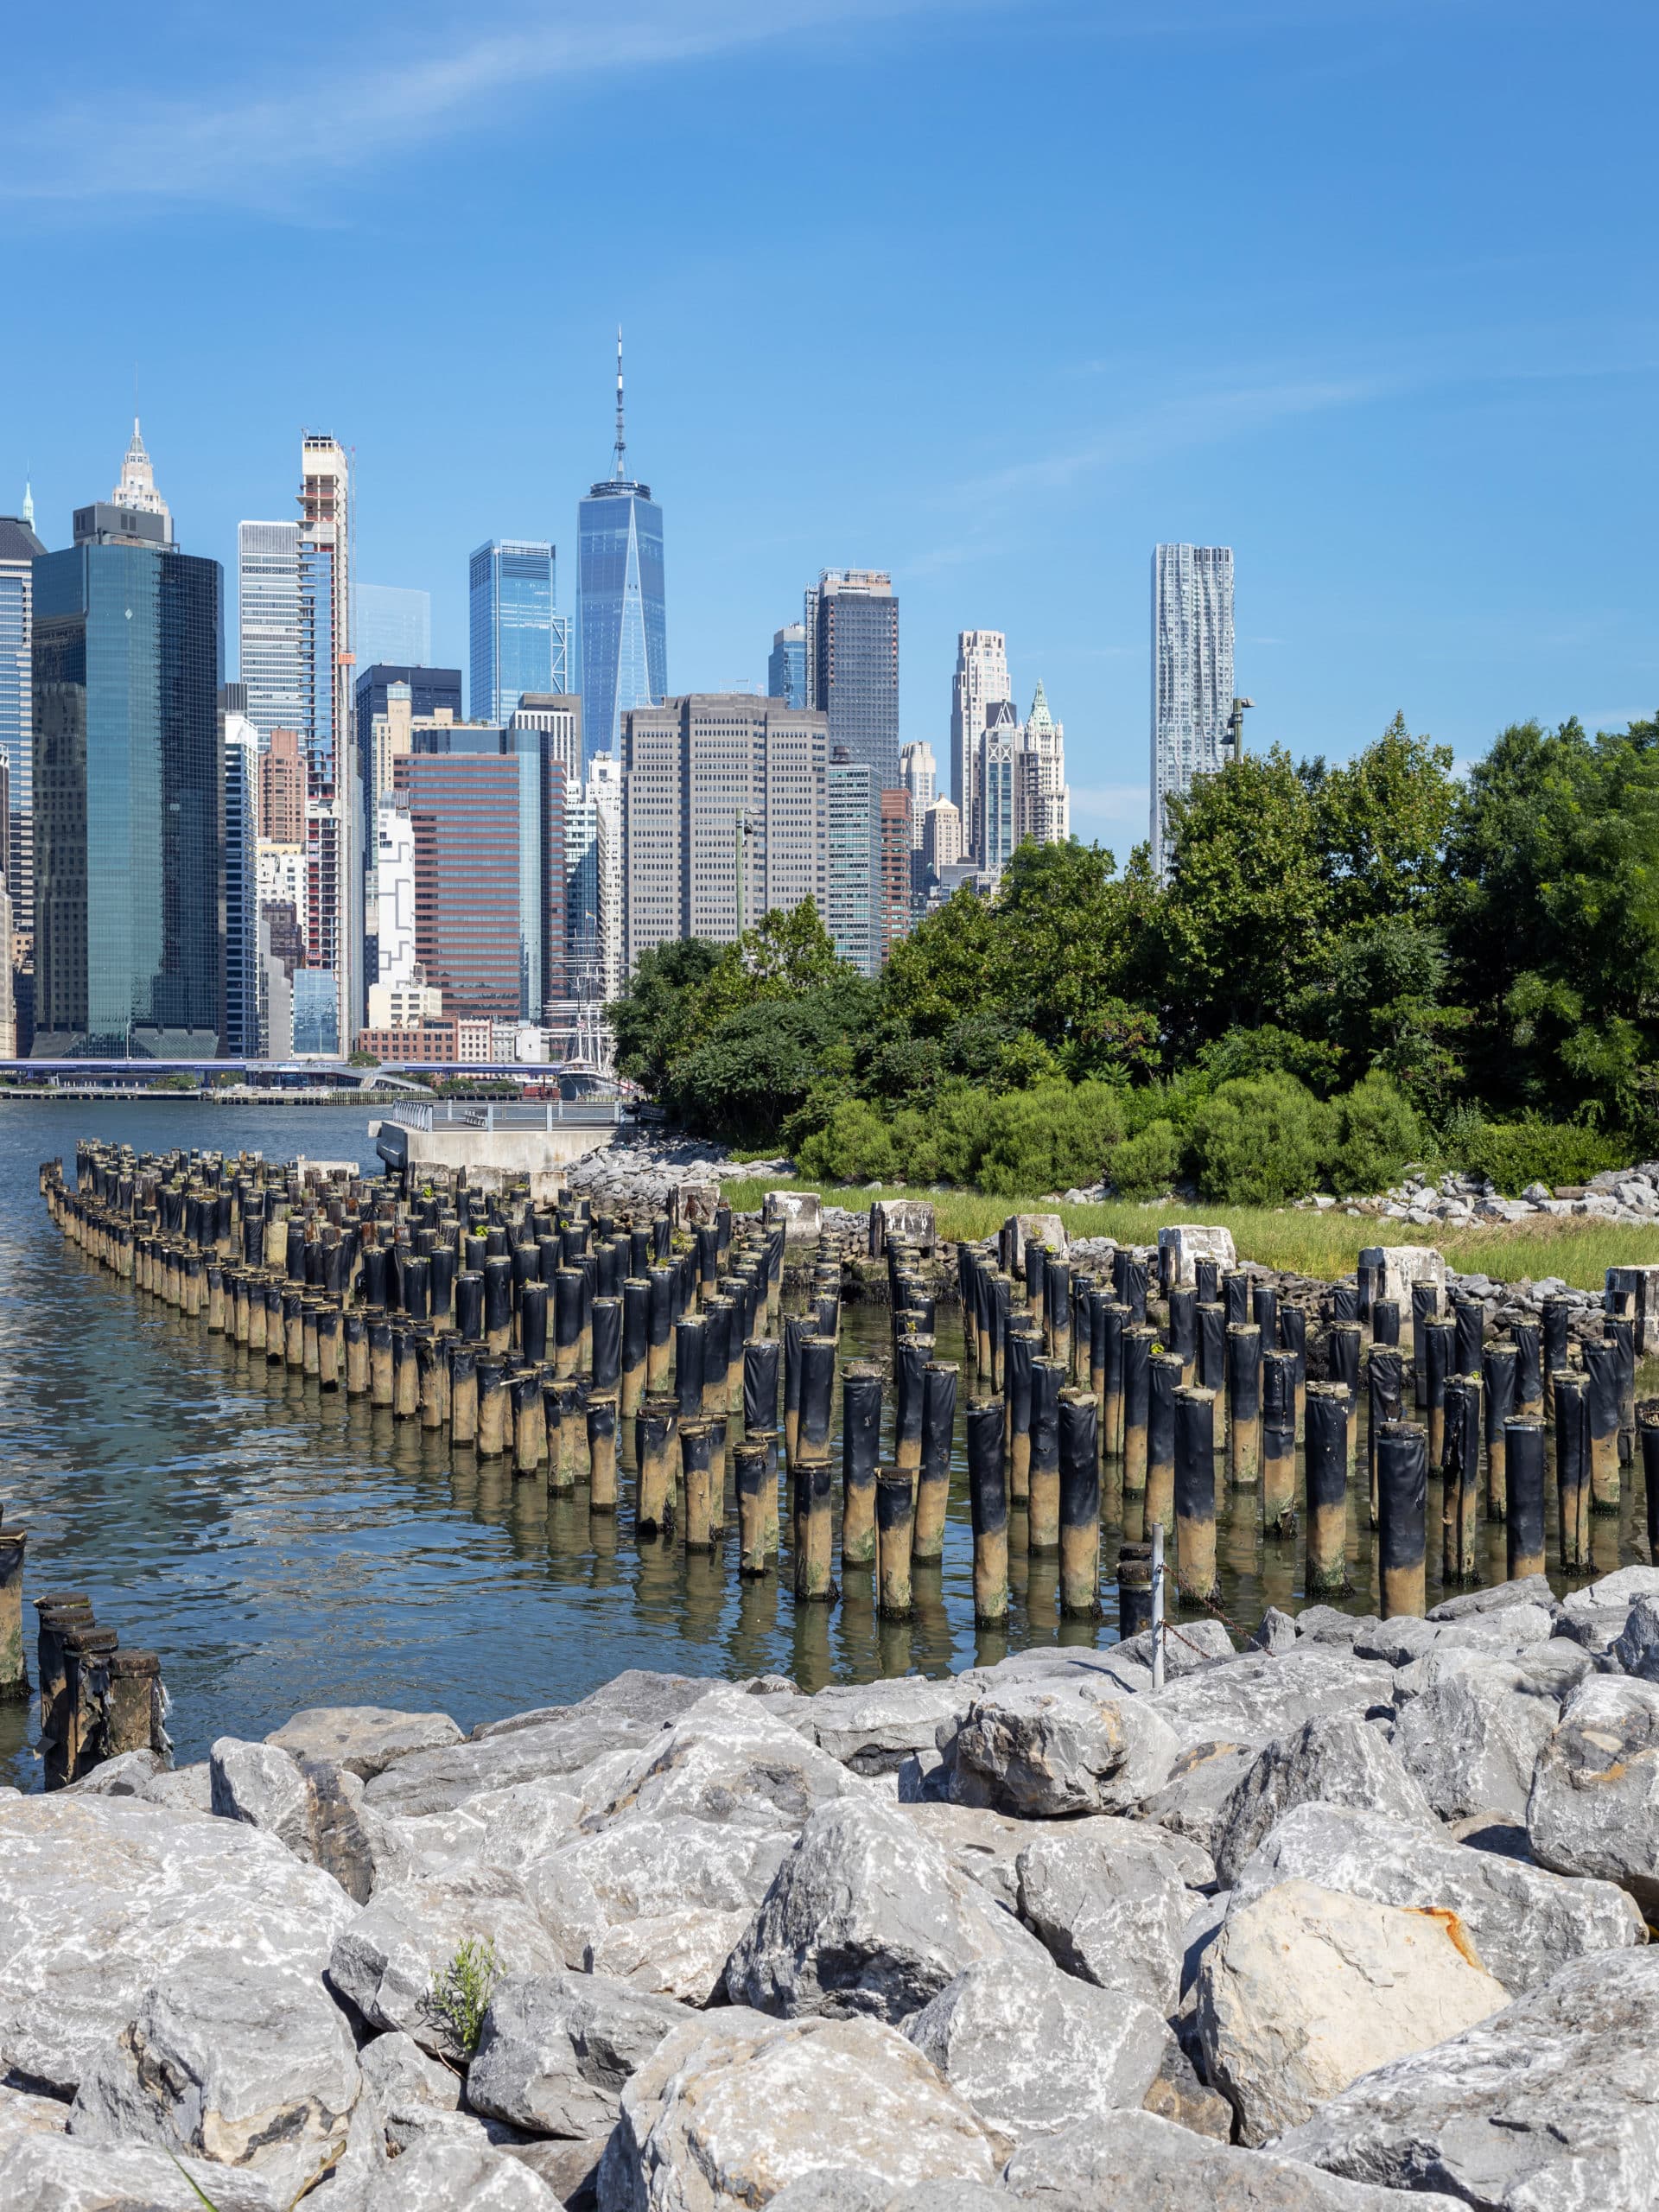 Pile field and salt marsh at Pier 1 on a sunny day with view of Lower Manhattan in distance.